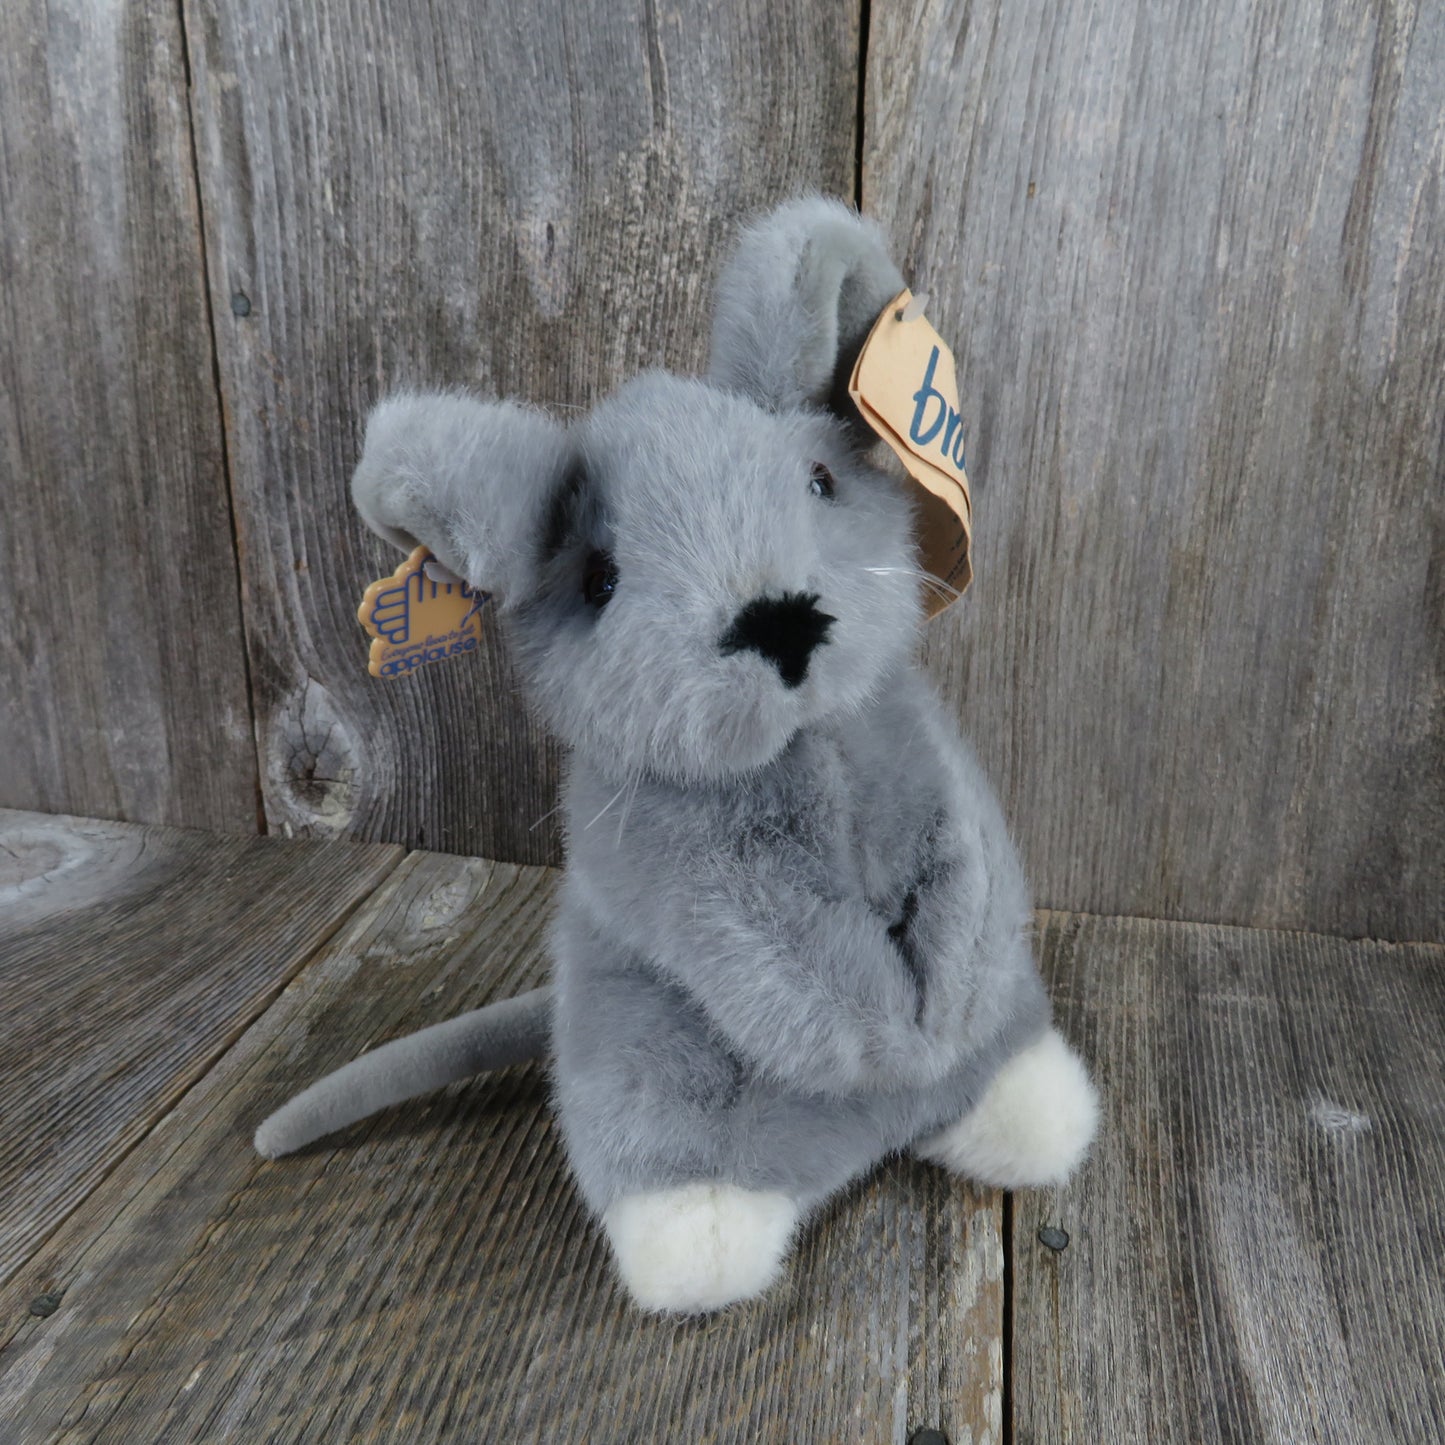 Vintage Mouse Plush Stuffed Animal Bravo Roquefort Toy Doll Grey 1988 Applause - At Grandma's Table